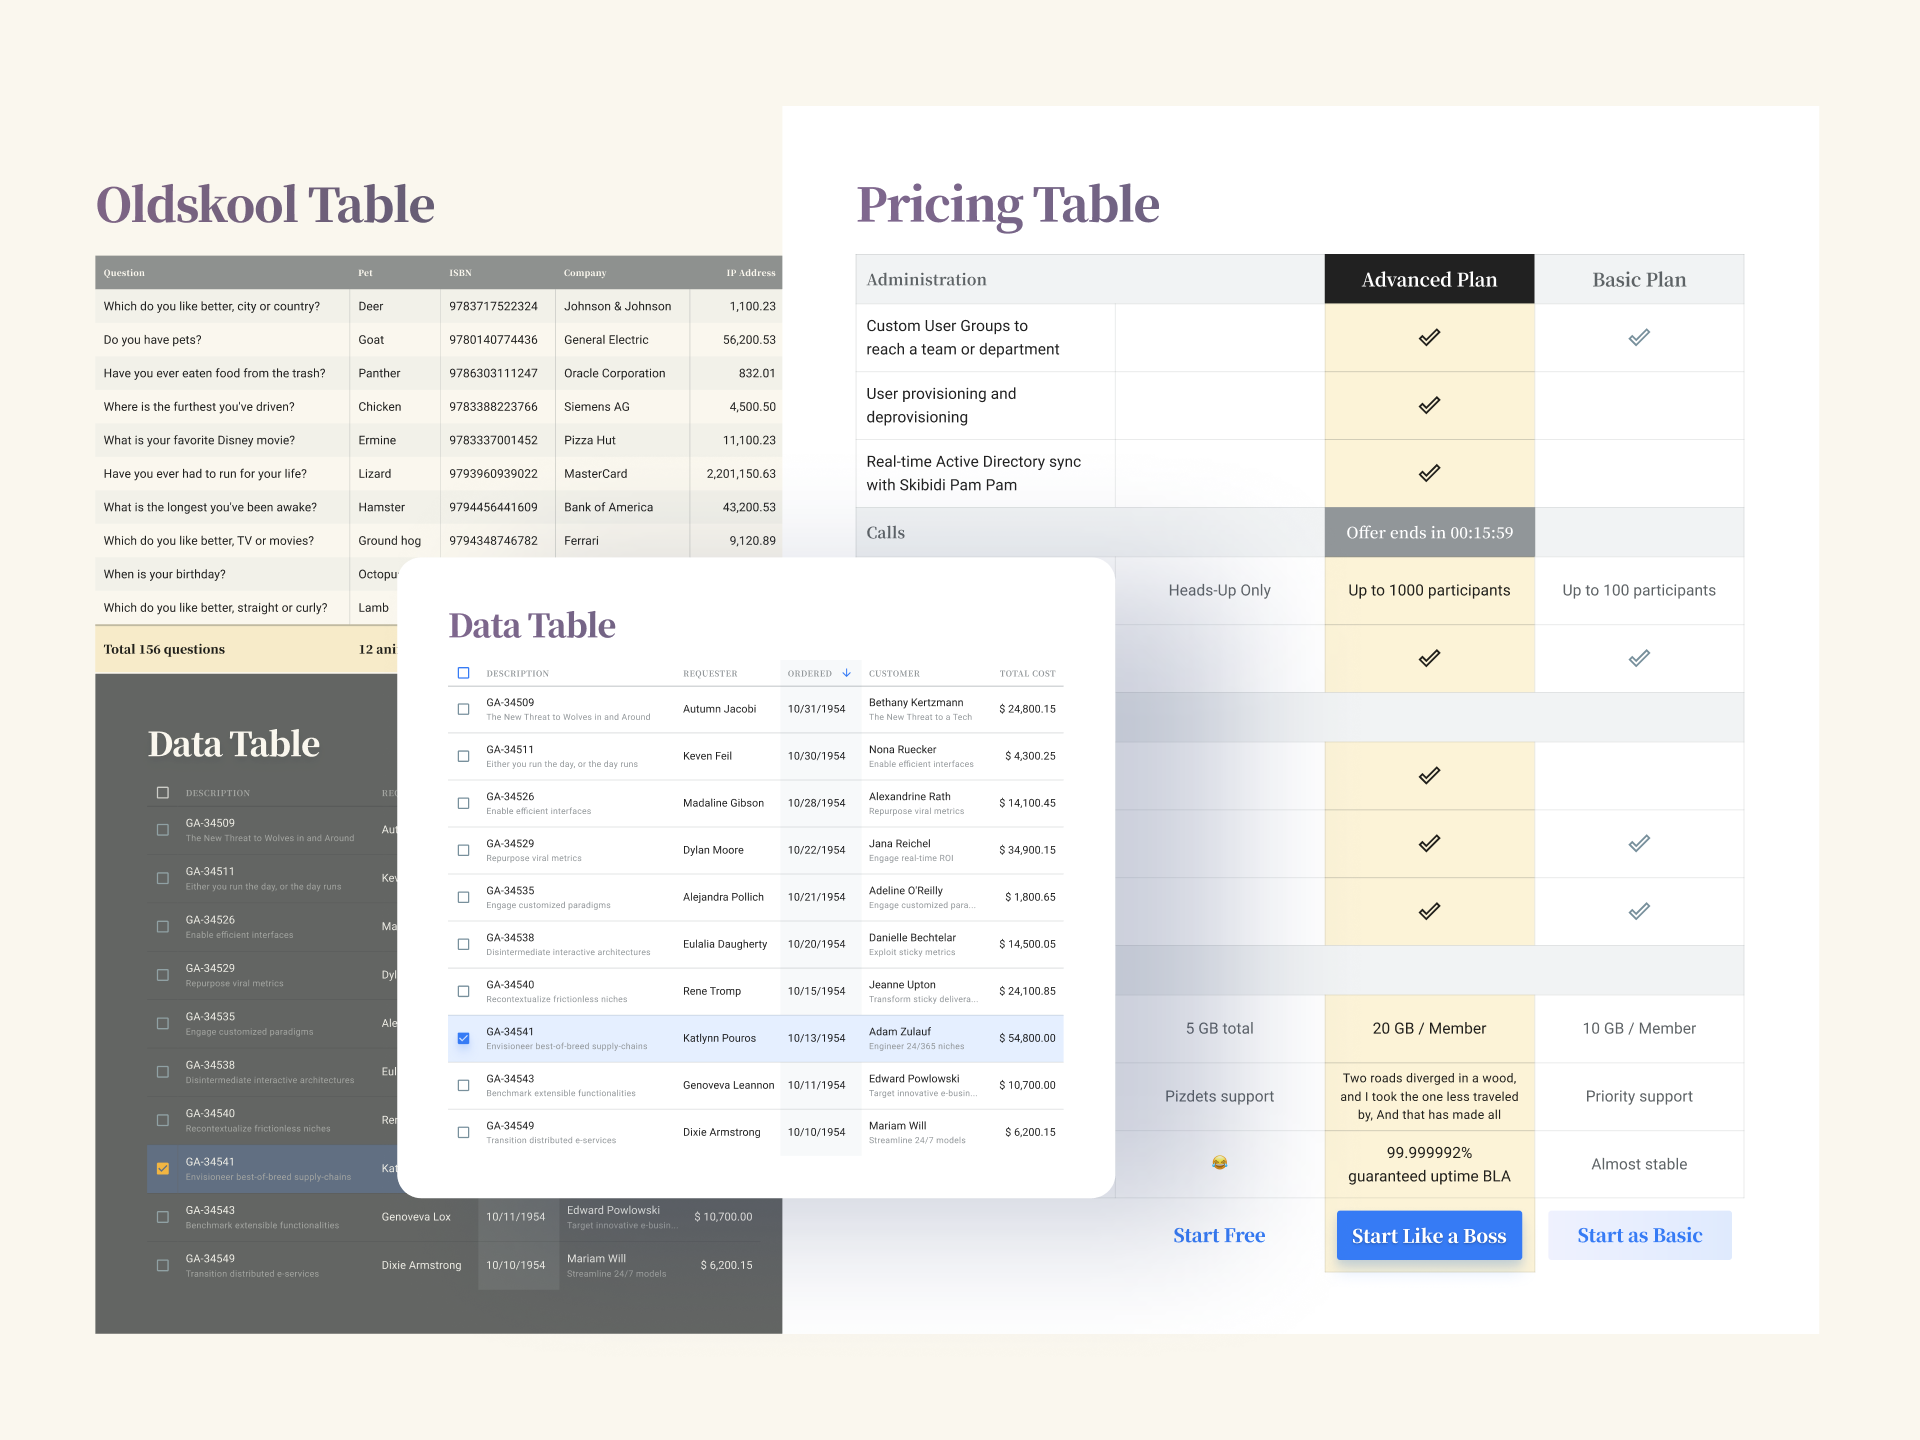 Dribbble - tables_ui_design_-_cells__grid___templates.png by Roman ...